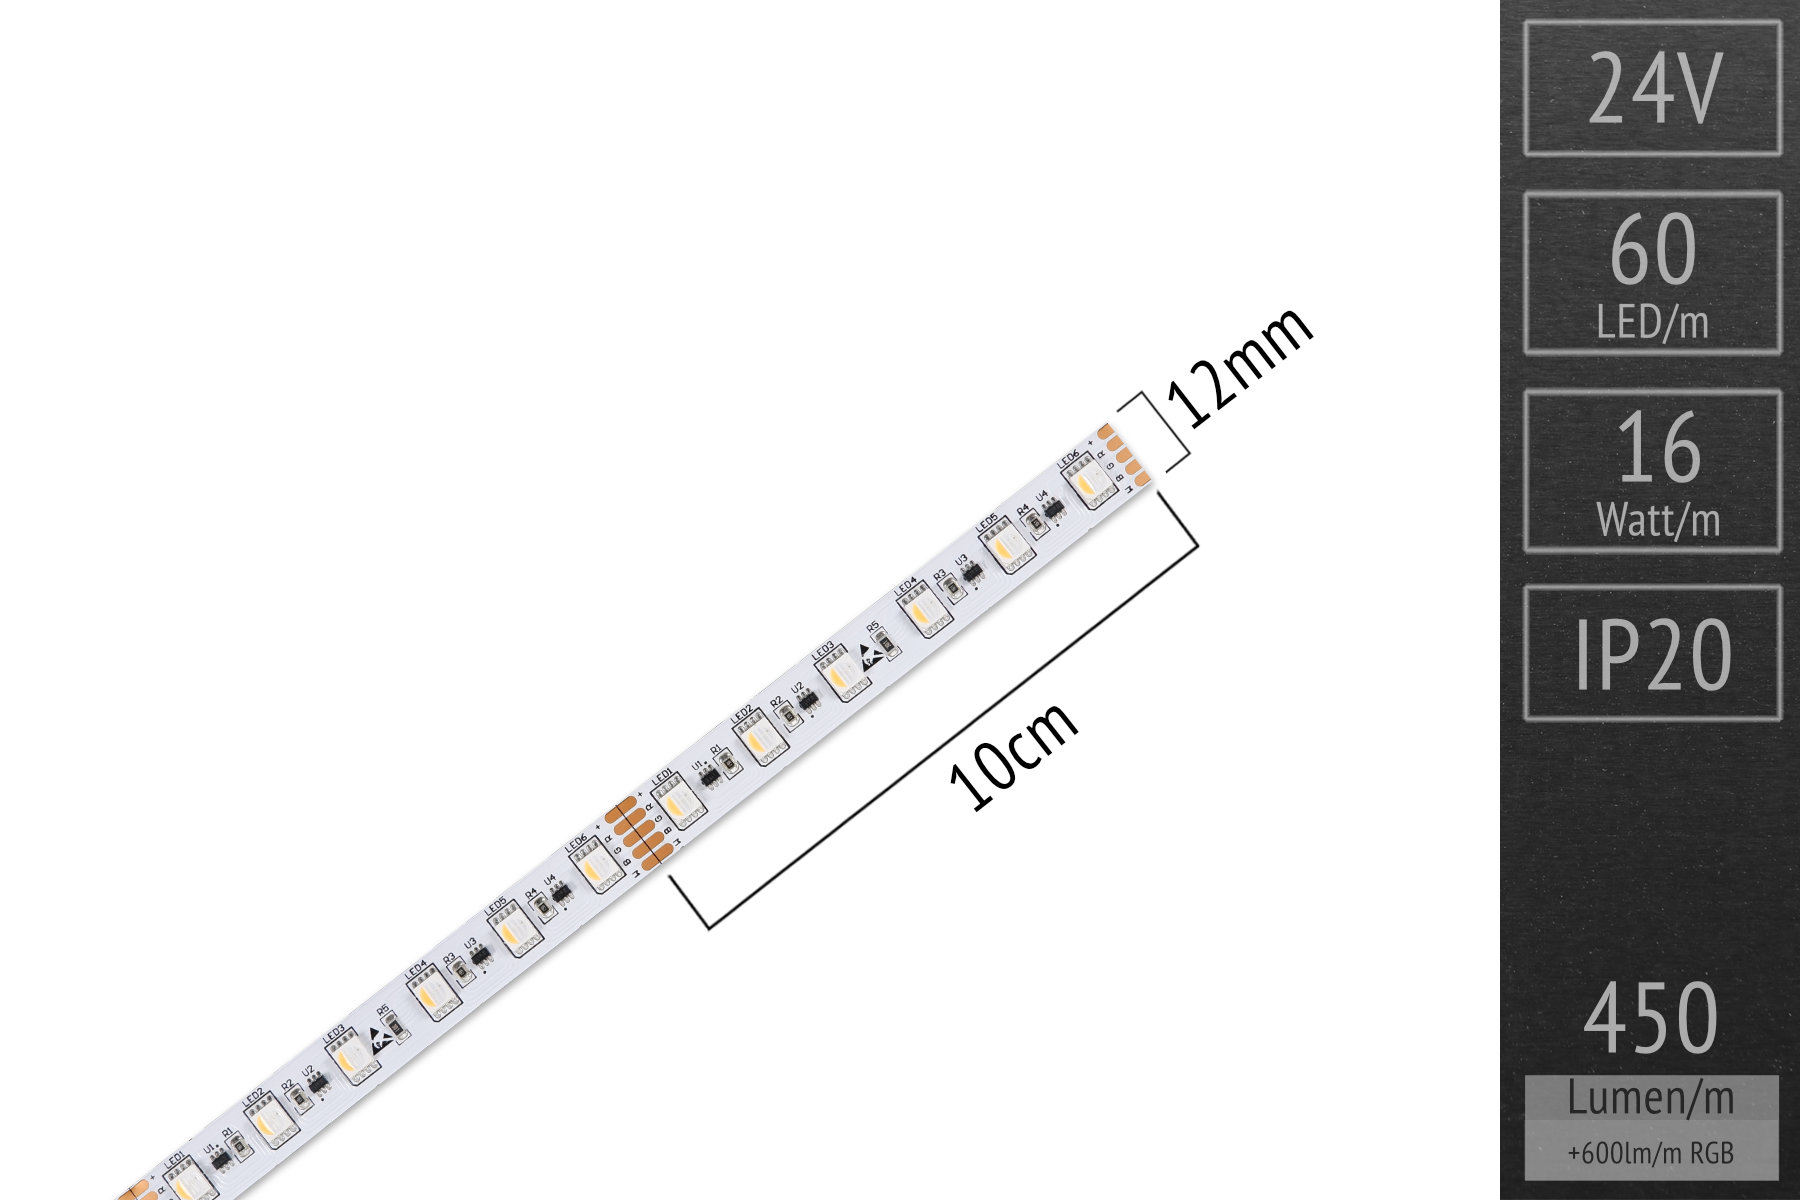 RGBWW for extra long installations - 60 LED/m